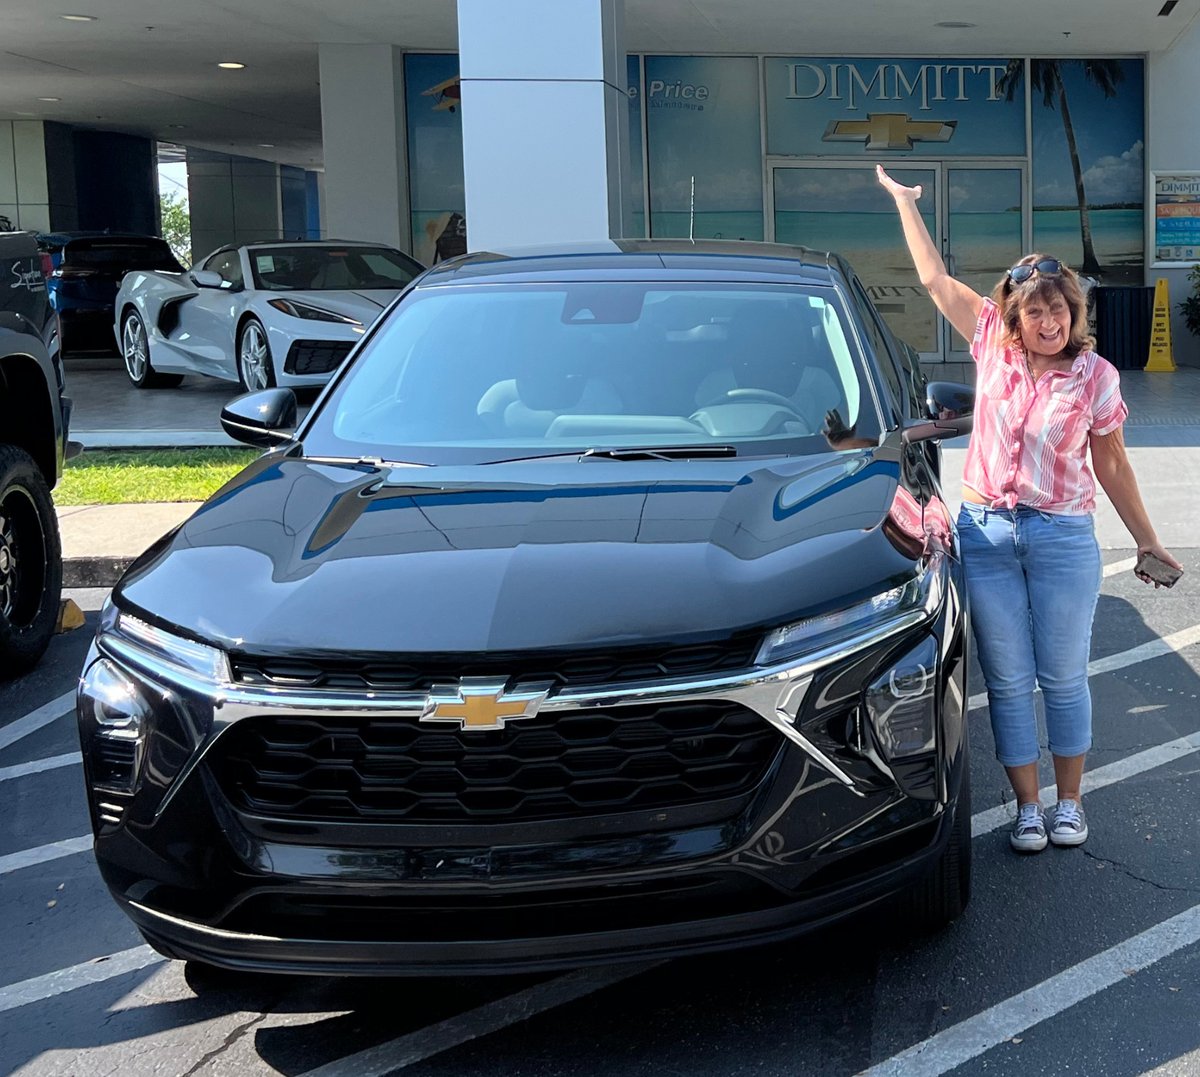 Ta-da! Check it out! Denise recently picked up this brand-new #2024Trax from Christopher Nance at #DimmittChevrolet! 💯 Talk about awesome! 🤩 Congrats Denise, and thank you! 🔥 #DimmittFam #NewCarSmell #HappyDriving